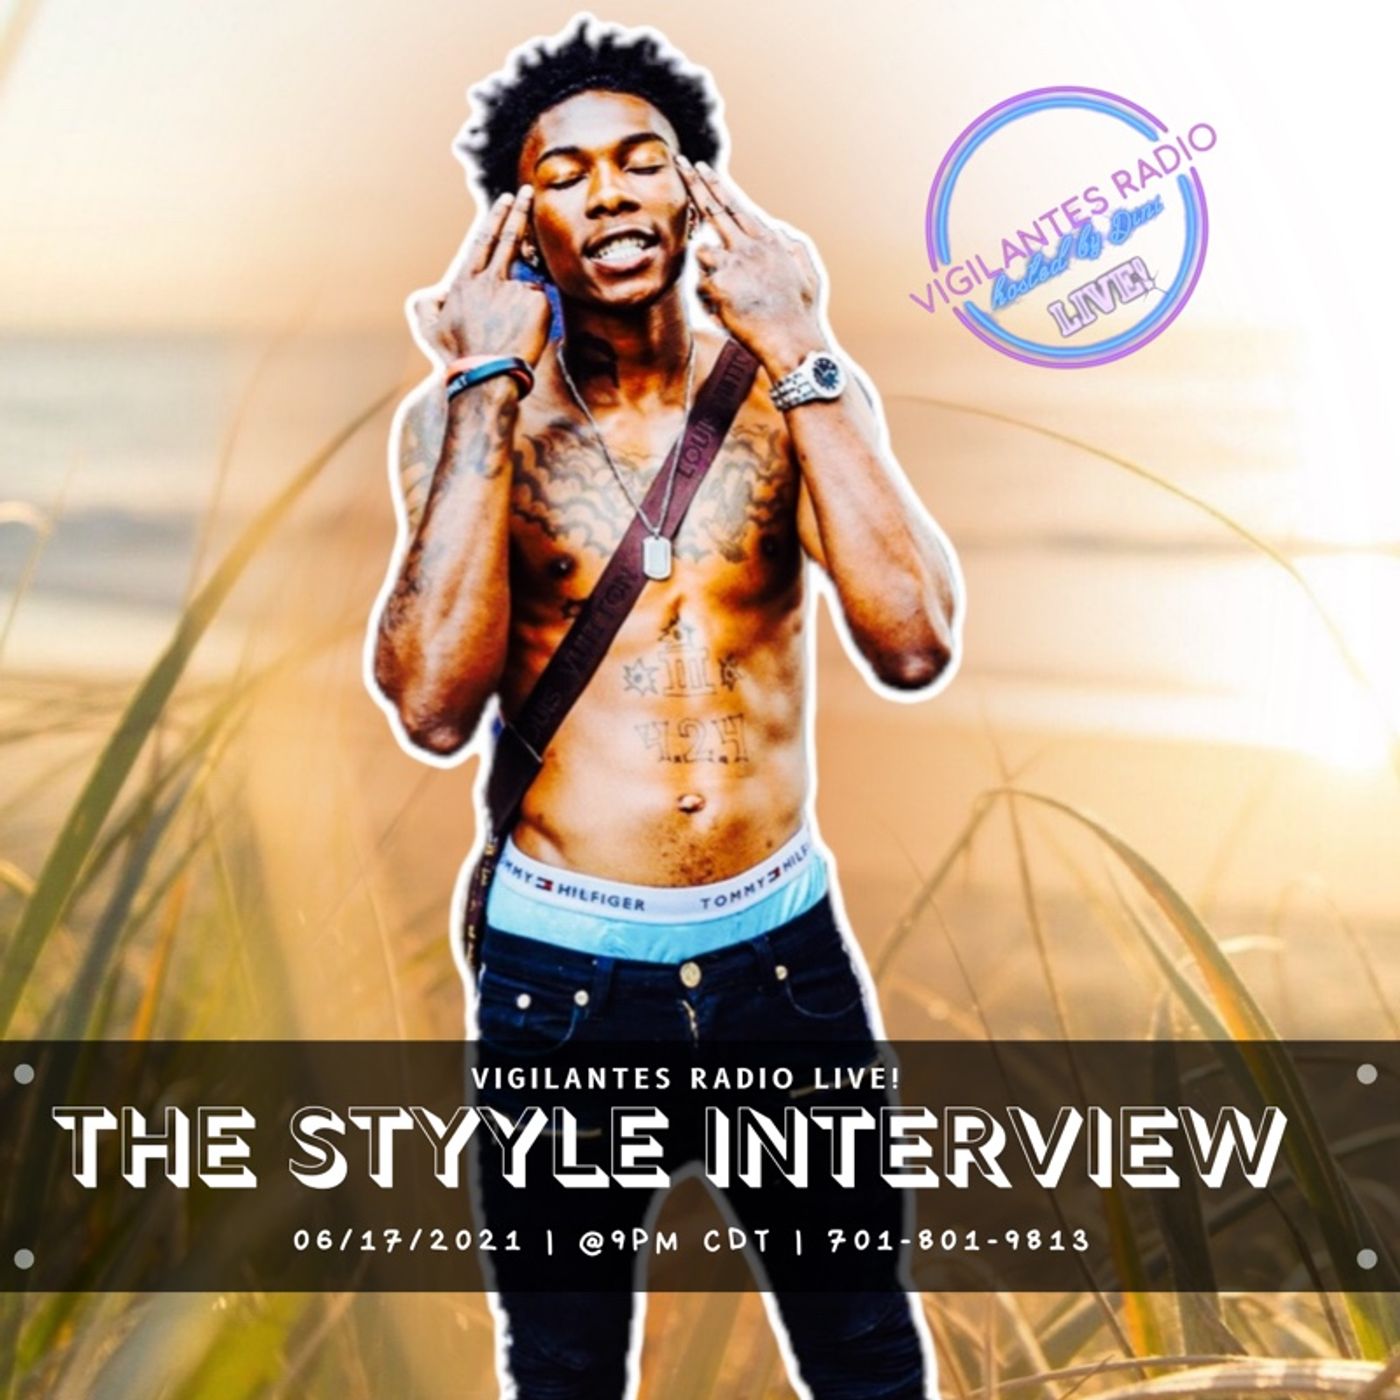 The Styyle Interview. Image